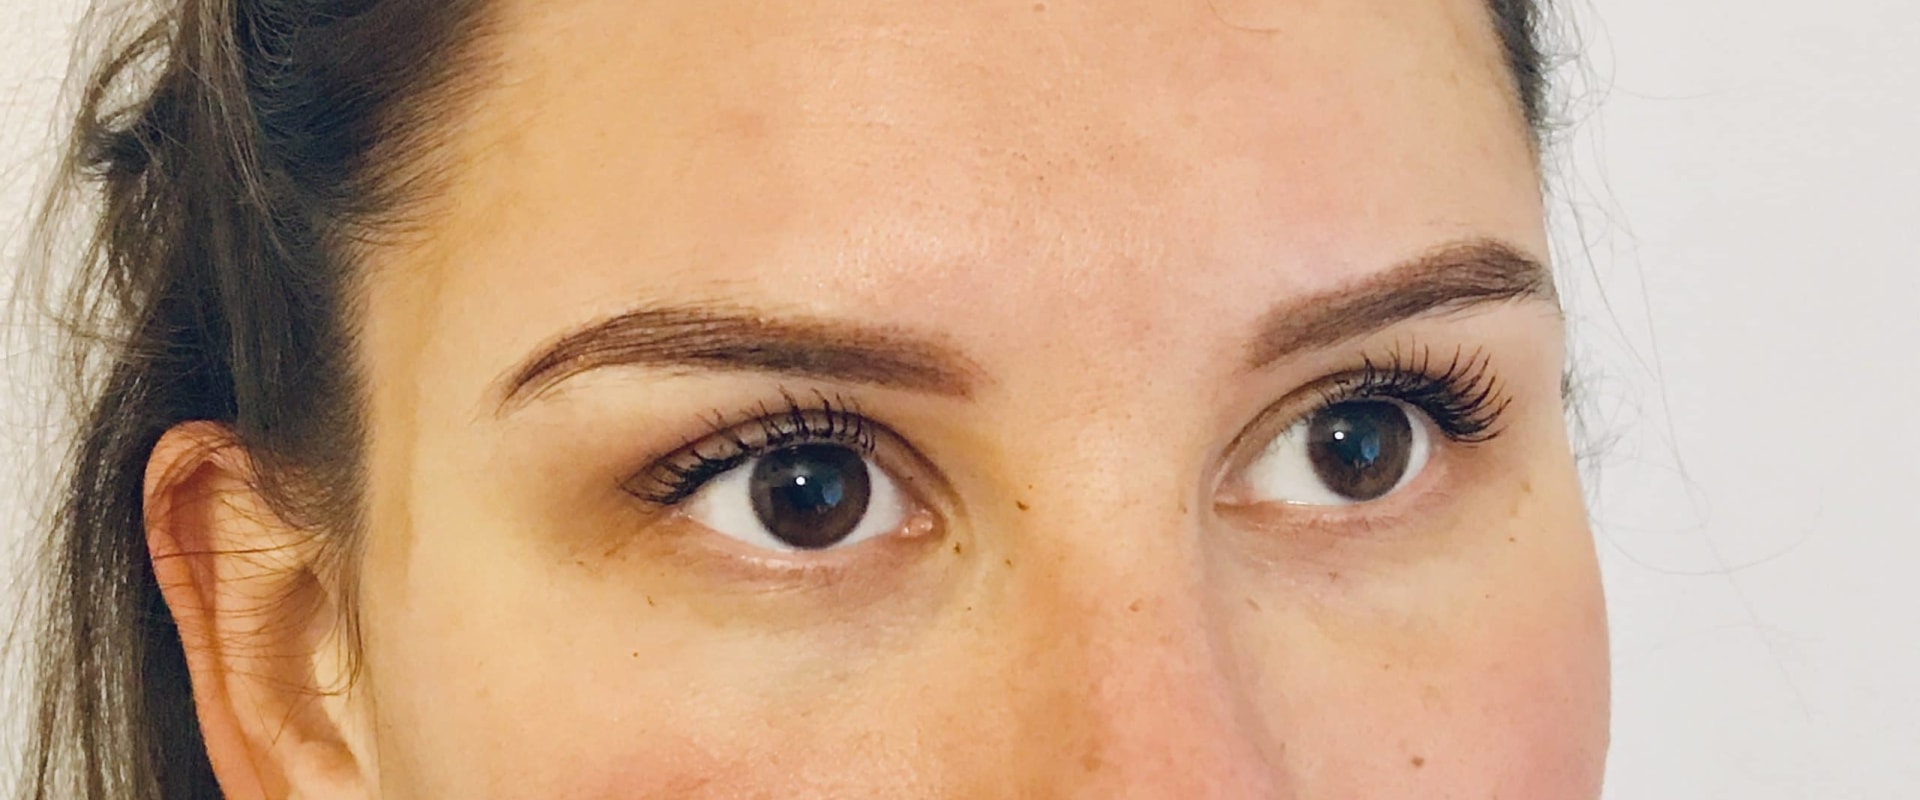 Will the semi-permanent eyeliner completely fade?